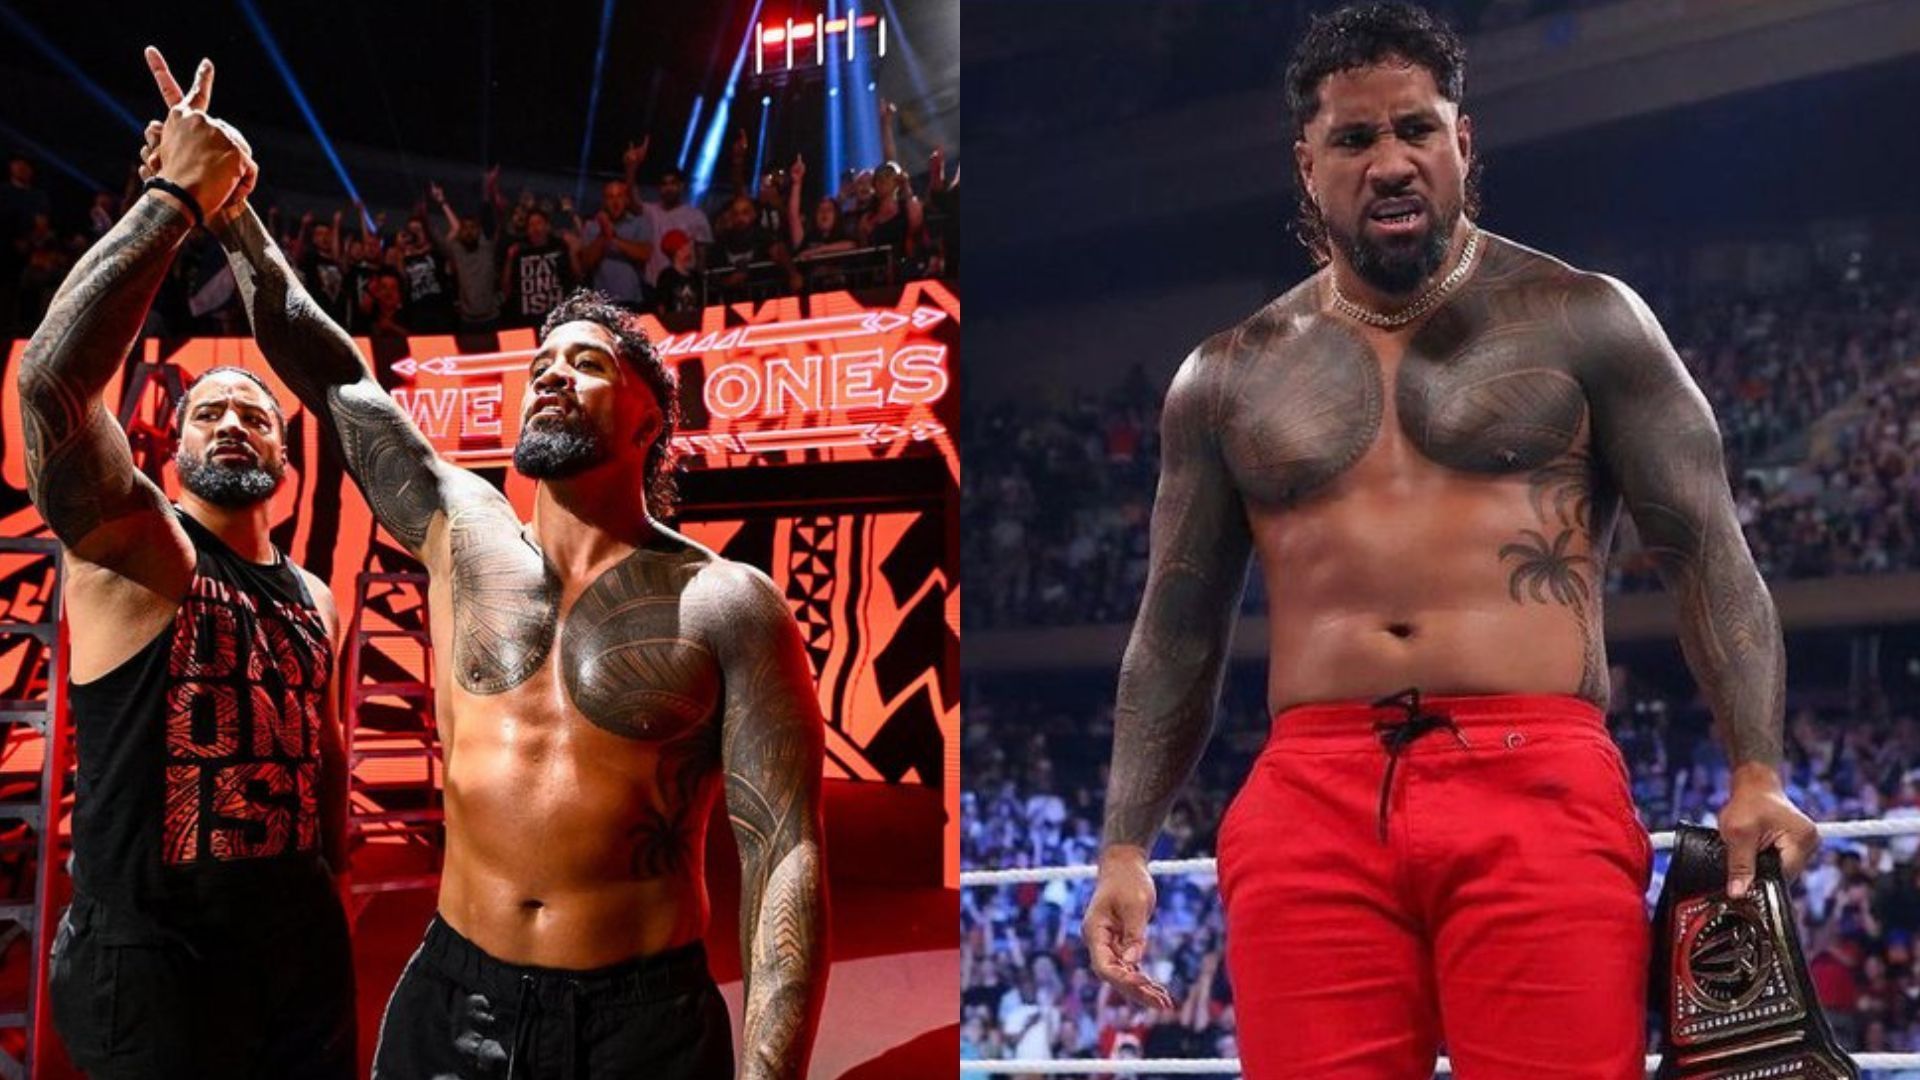 Jey Uso has challenged Roman Reigns to a title match